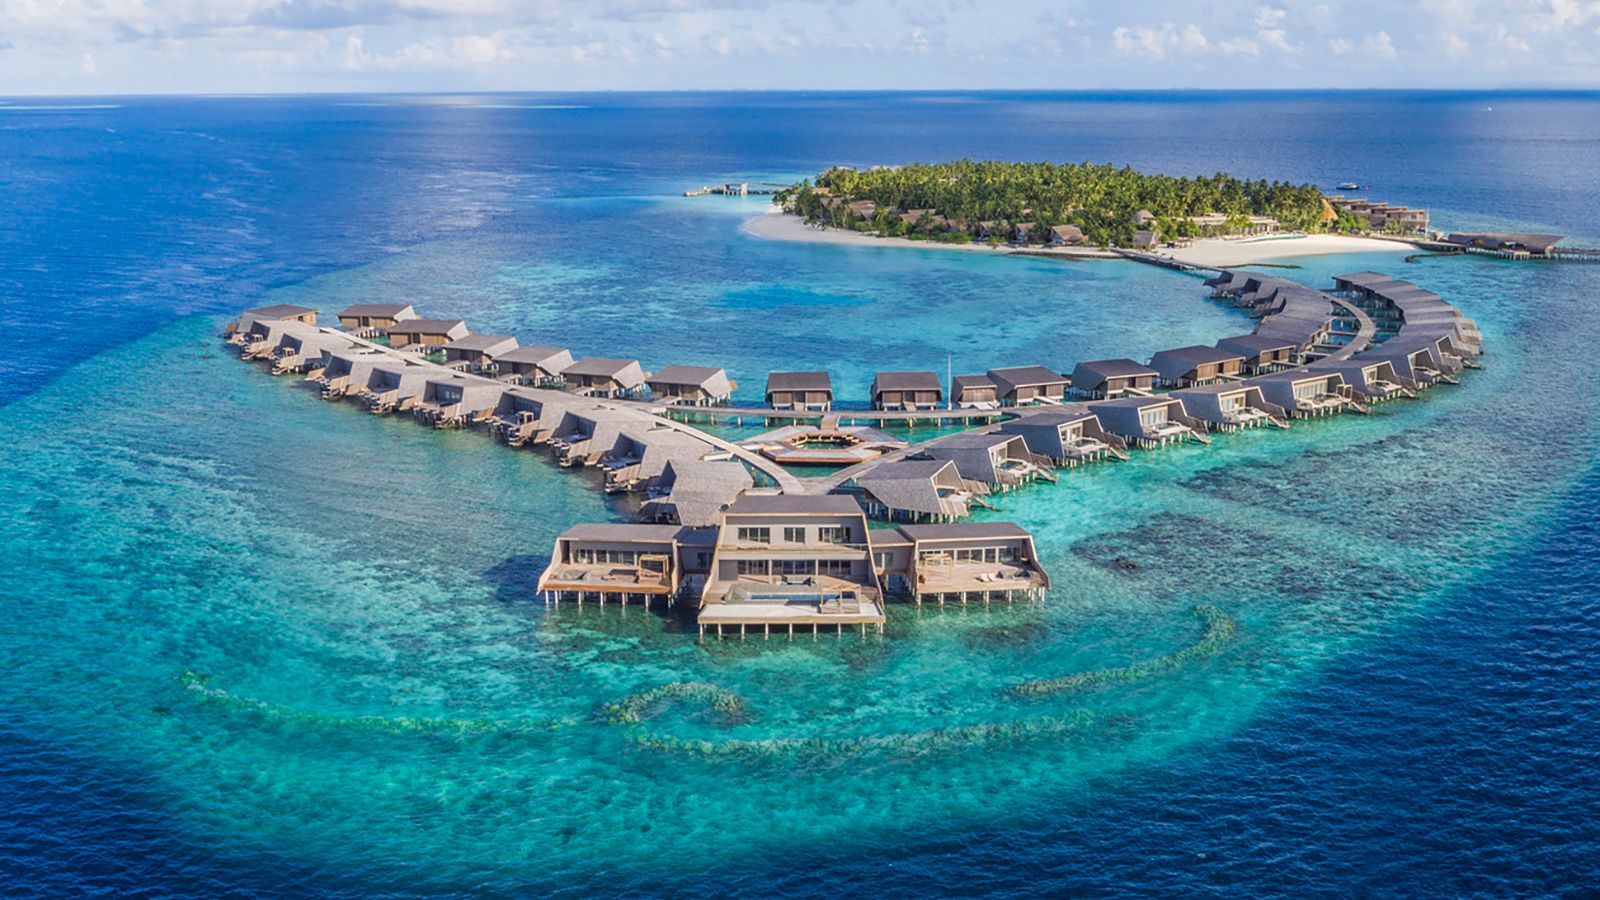 <strong>The St. Regis Maldives Vommuli Resort: </strong>The 44 overwater villas at this resort are modern and minimalist. The bathrooms are covered in slick marble, while the bedrooms are lined with bright, Scandi-style timber.